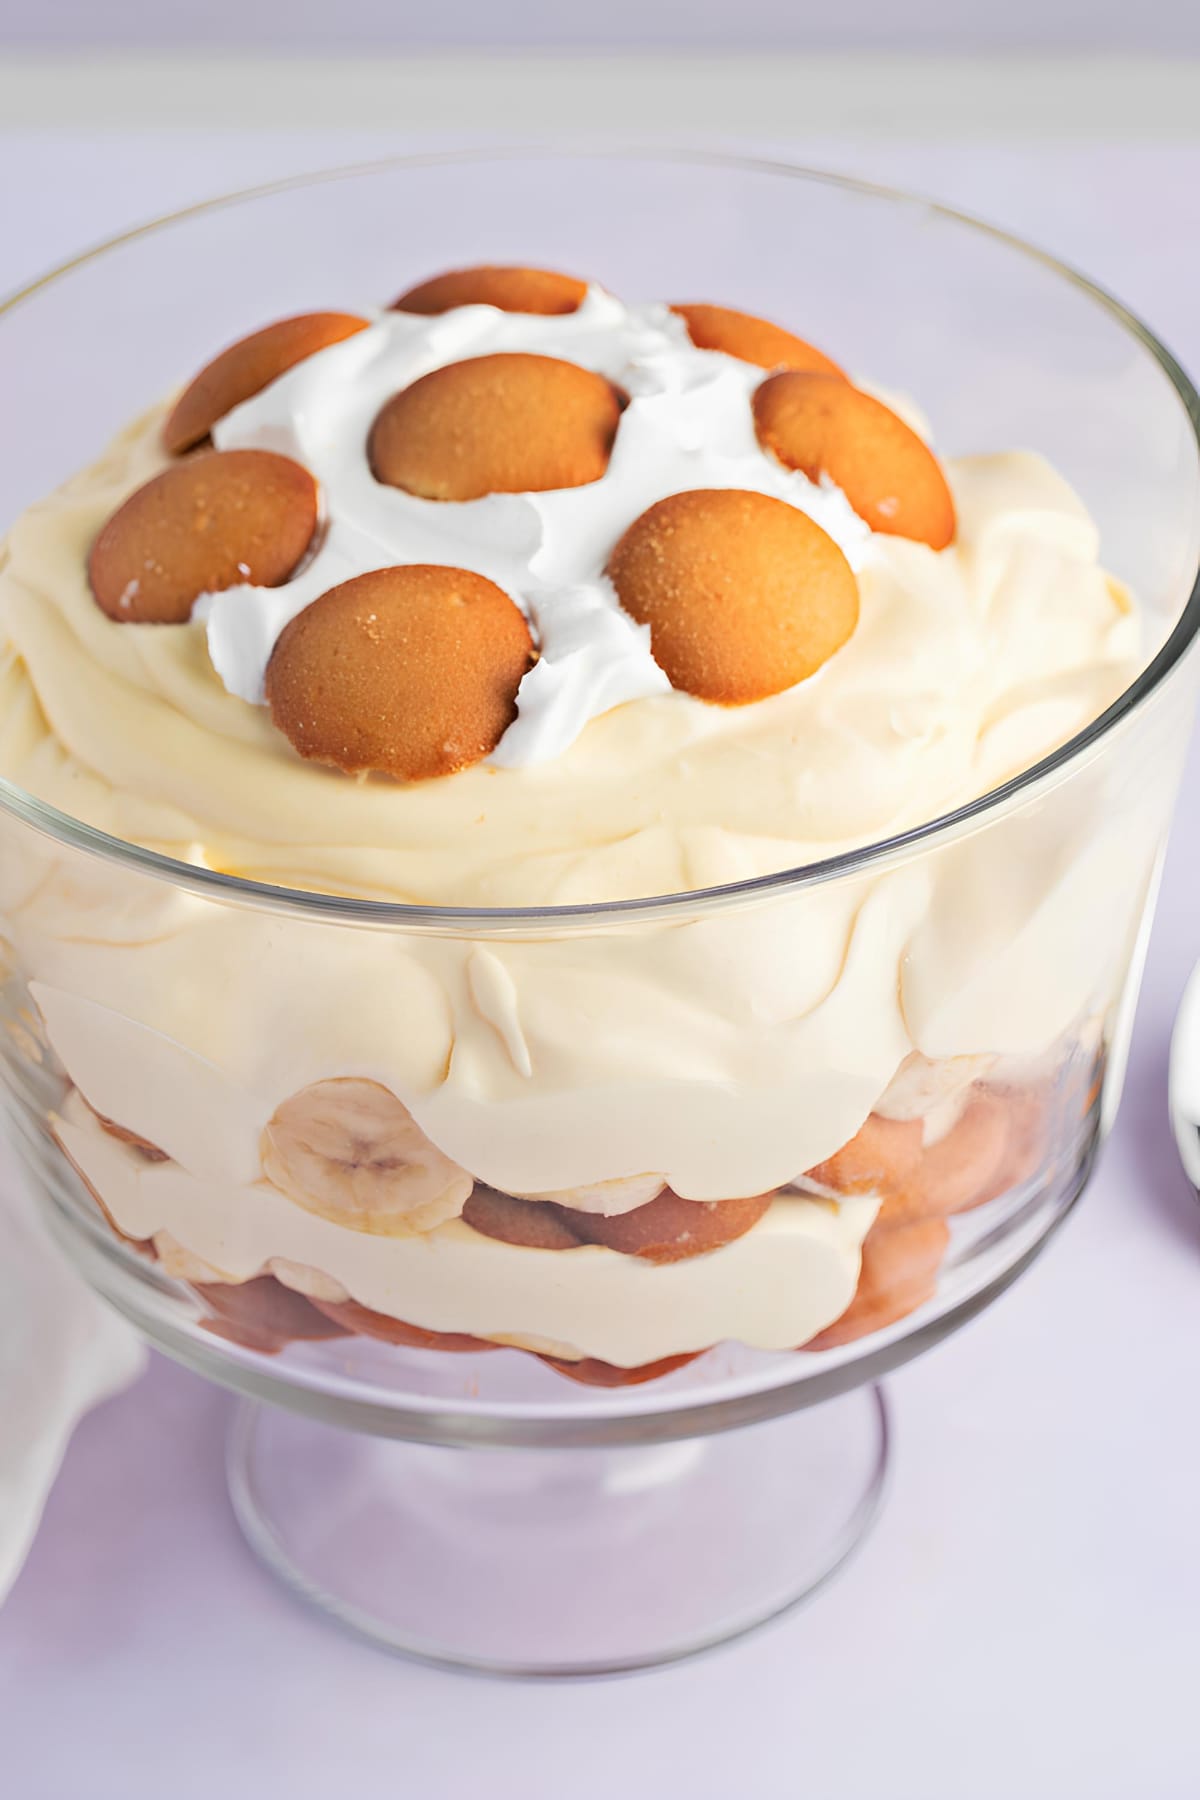 Homemade Banana Pudding with Vanilla Wafers and Whipped Cream